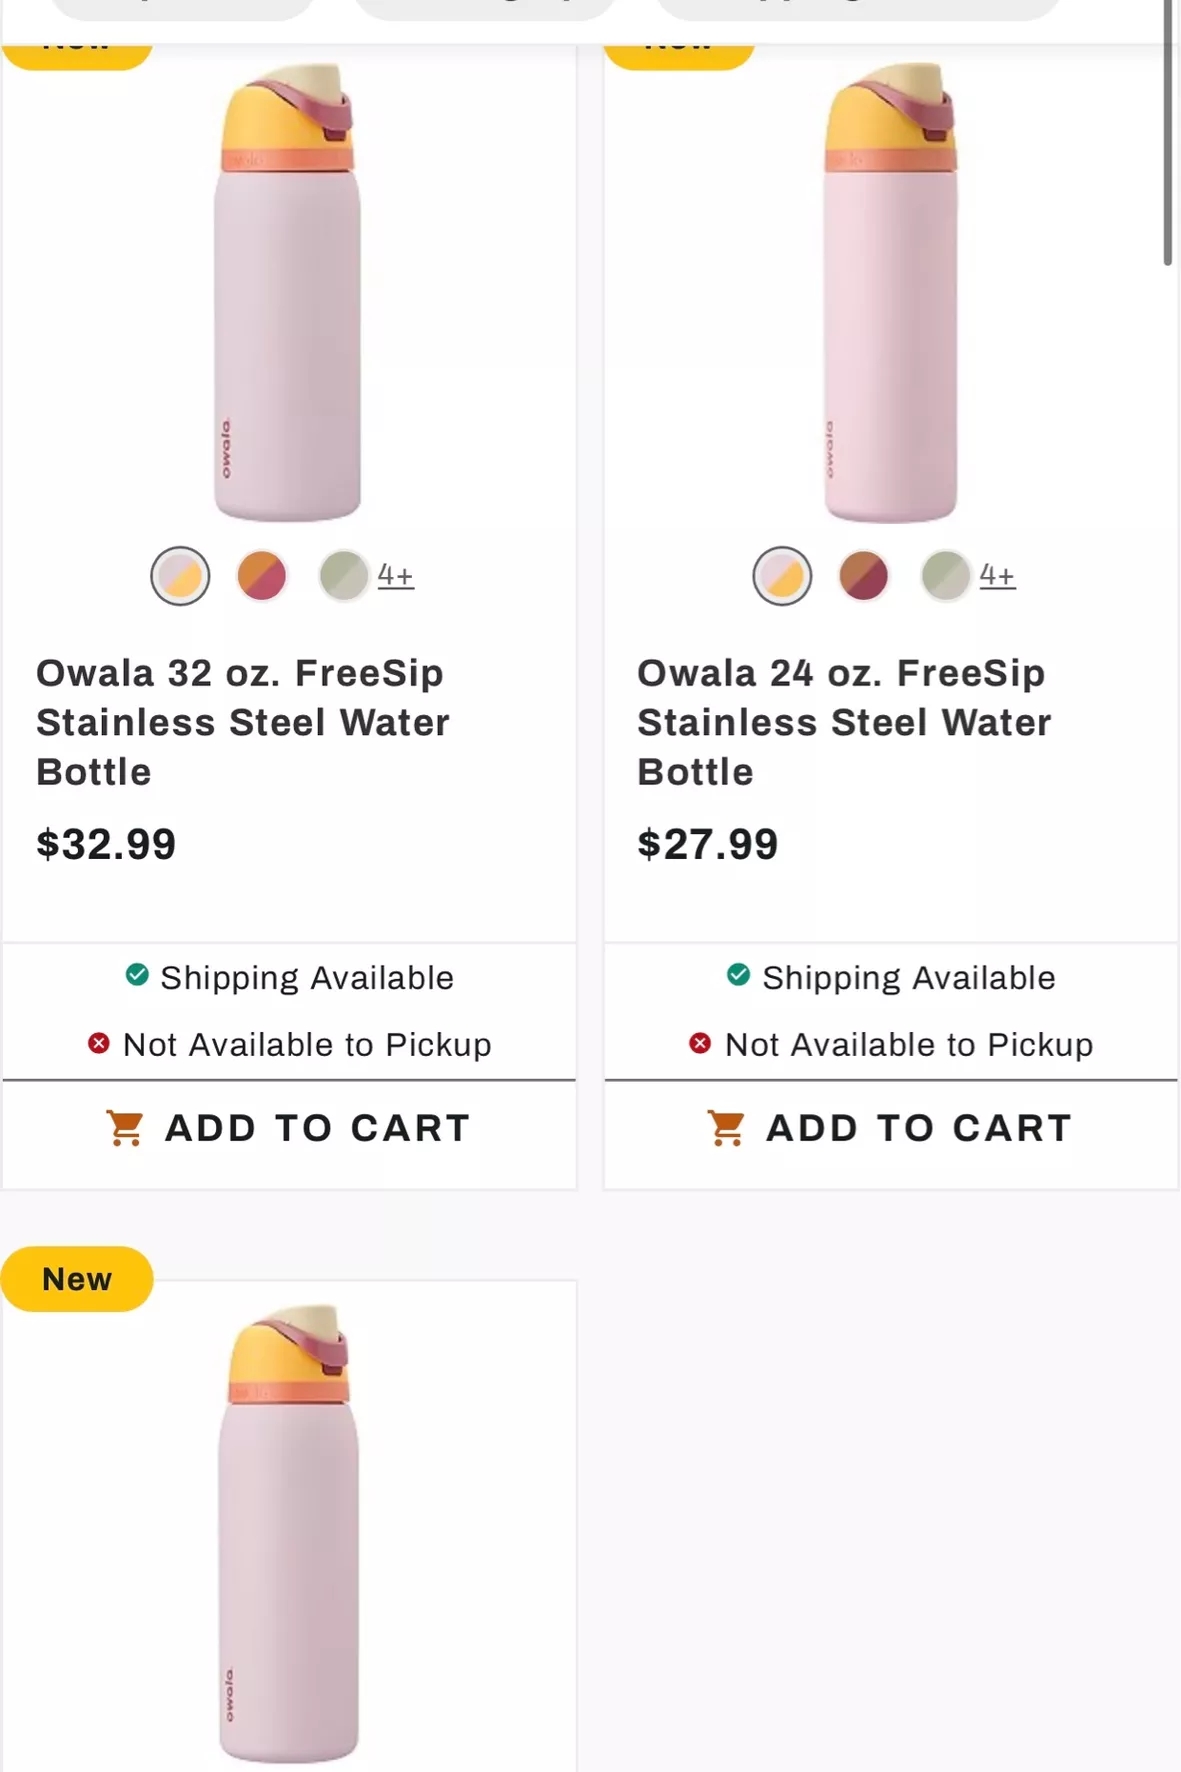 Owala 24 oz. FreeSip Stainless Steel Water Bottle in Candy Store